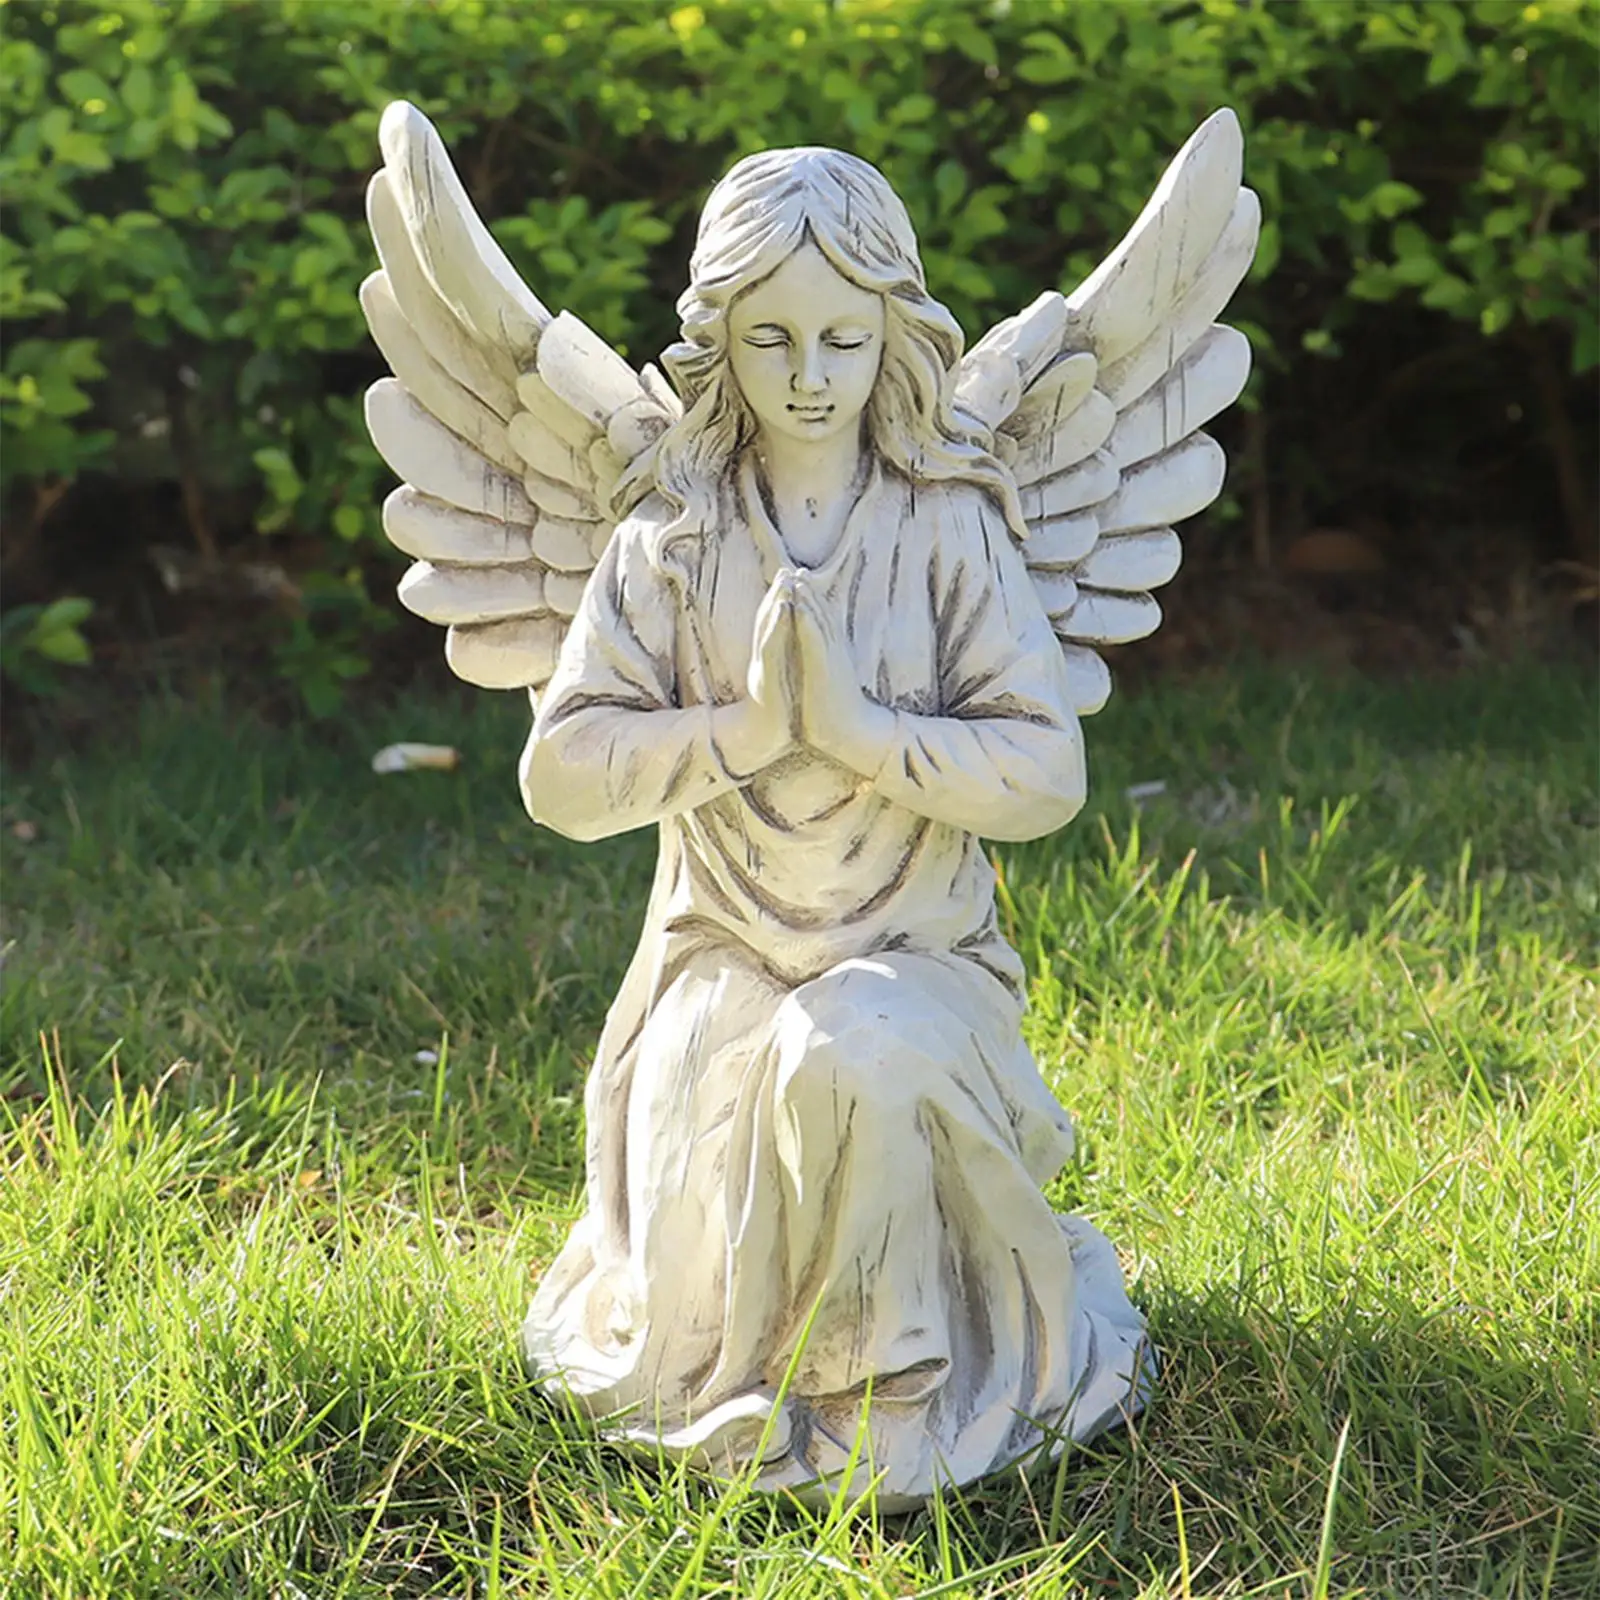 

Angel Garden Statue Waterproof Housewarming Gift Resin with wings Sculpture Ornament Figurines for Patio Outside Porch Yard Lawn